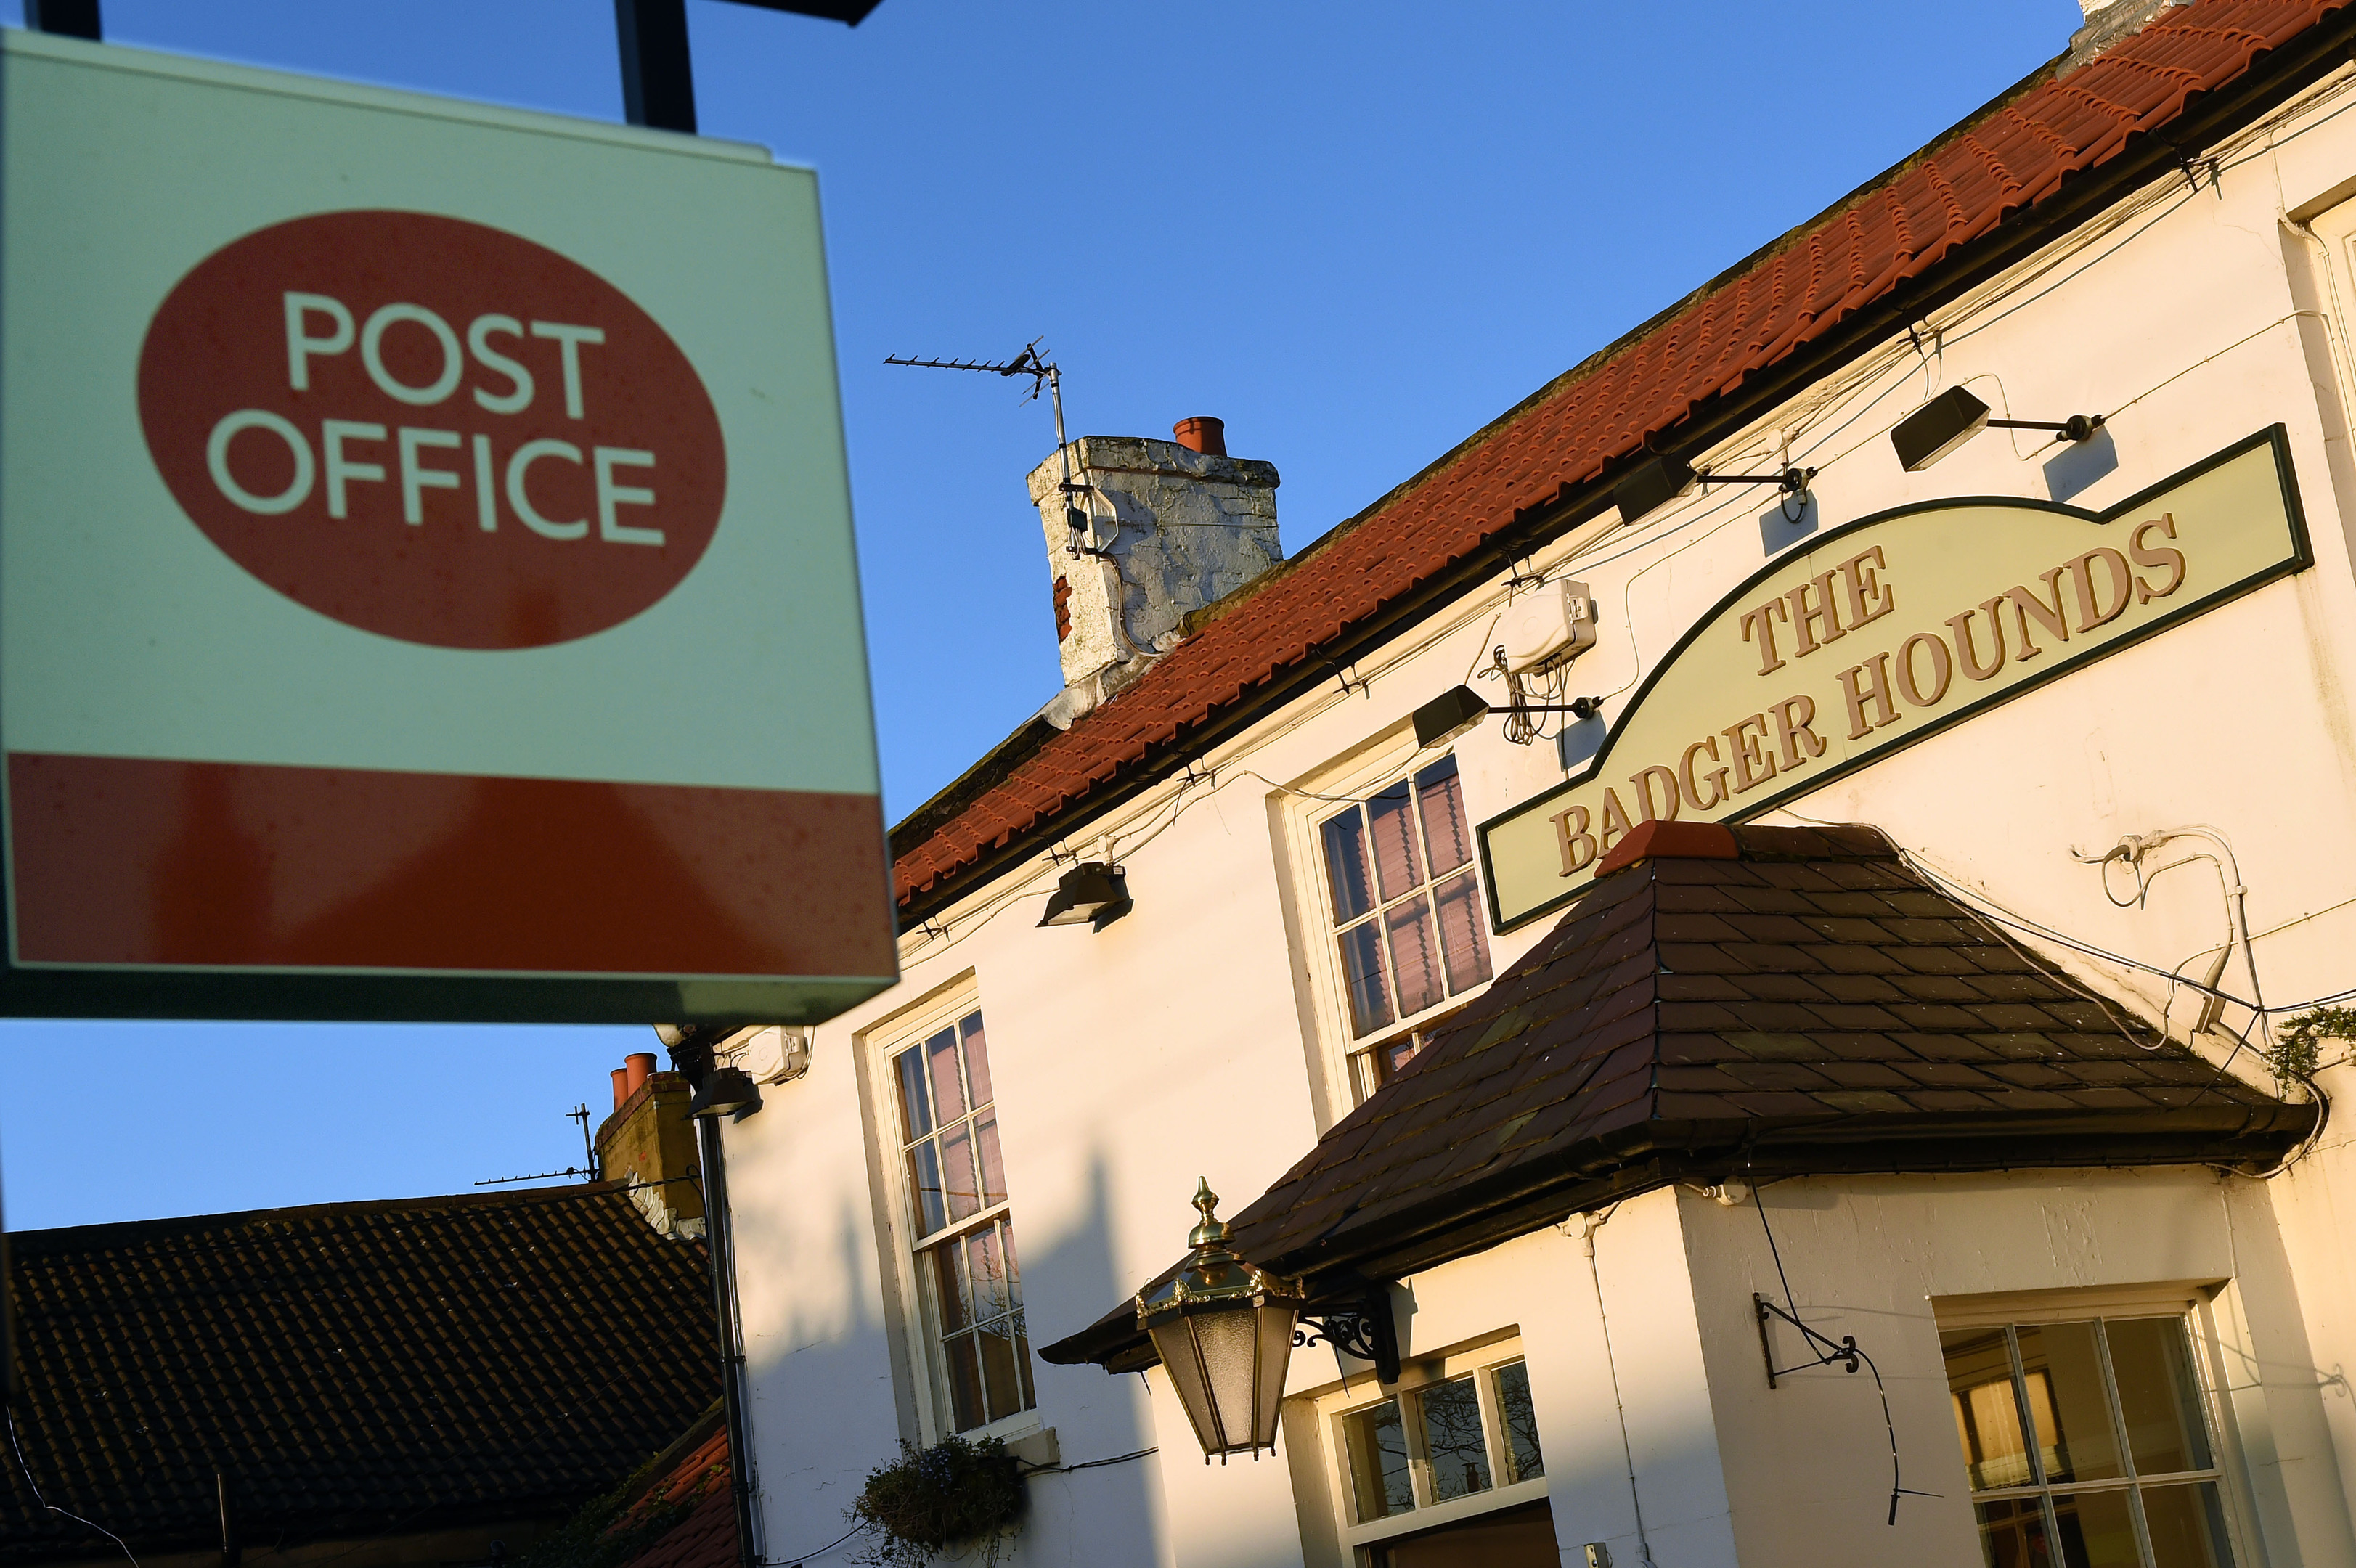 The Badger Hounds Pub - the unusual setting for a local Post Office (Doug Moody/Post Office/PA Wire)